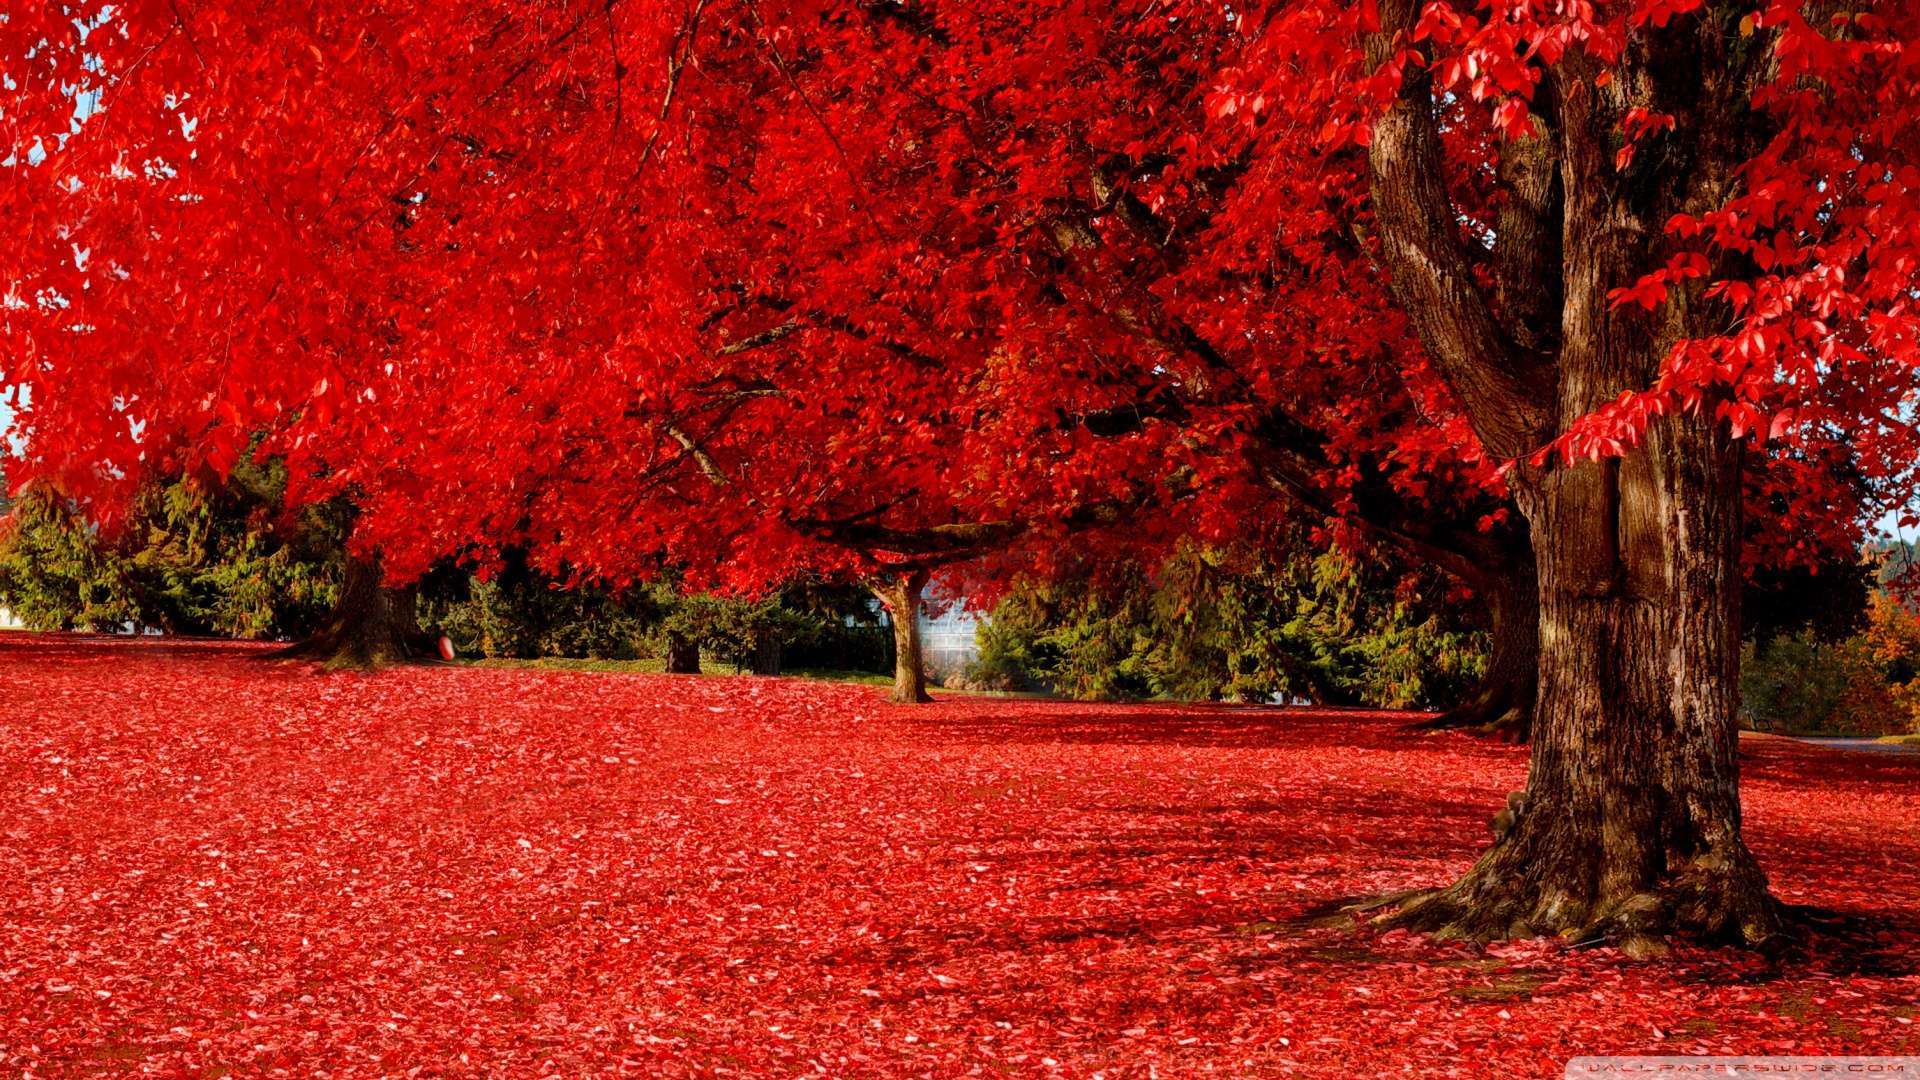 Wallpaper Red Autumn 2 Wallpaper 1080p HD Upload at February 16